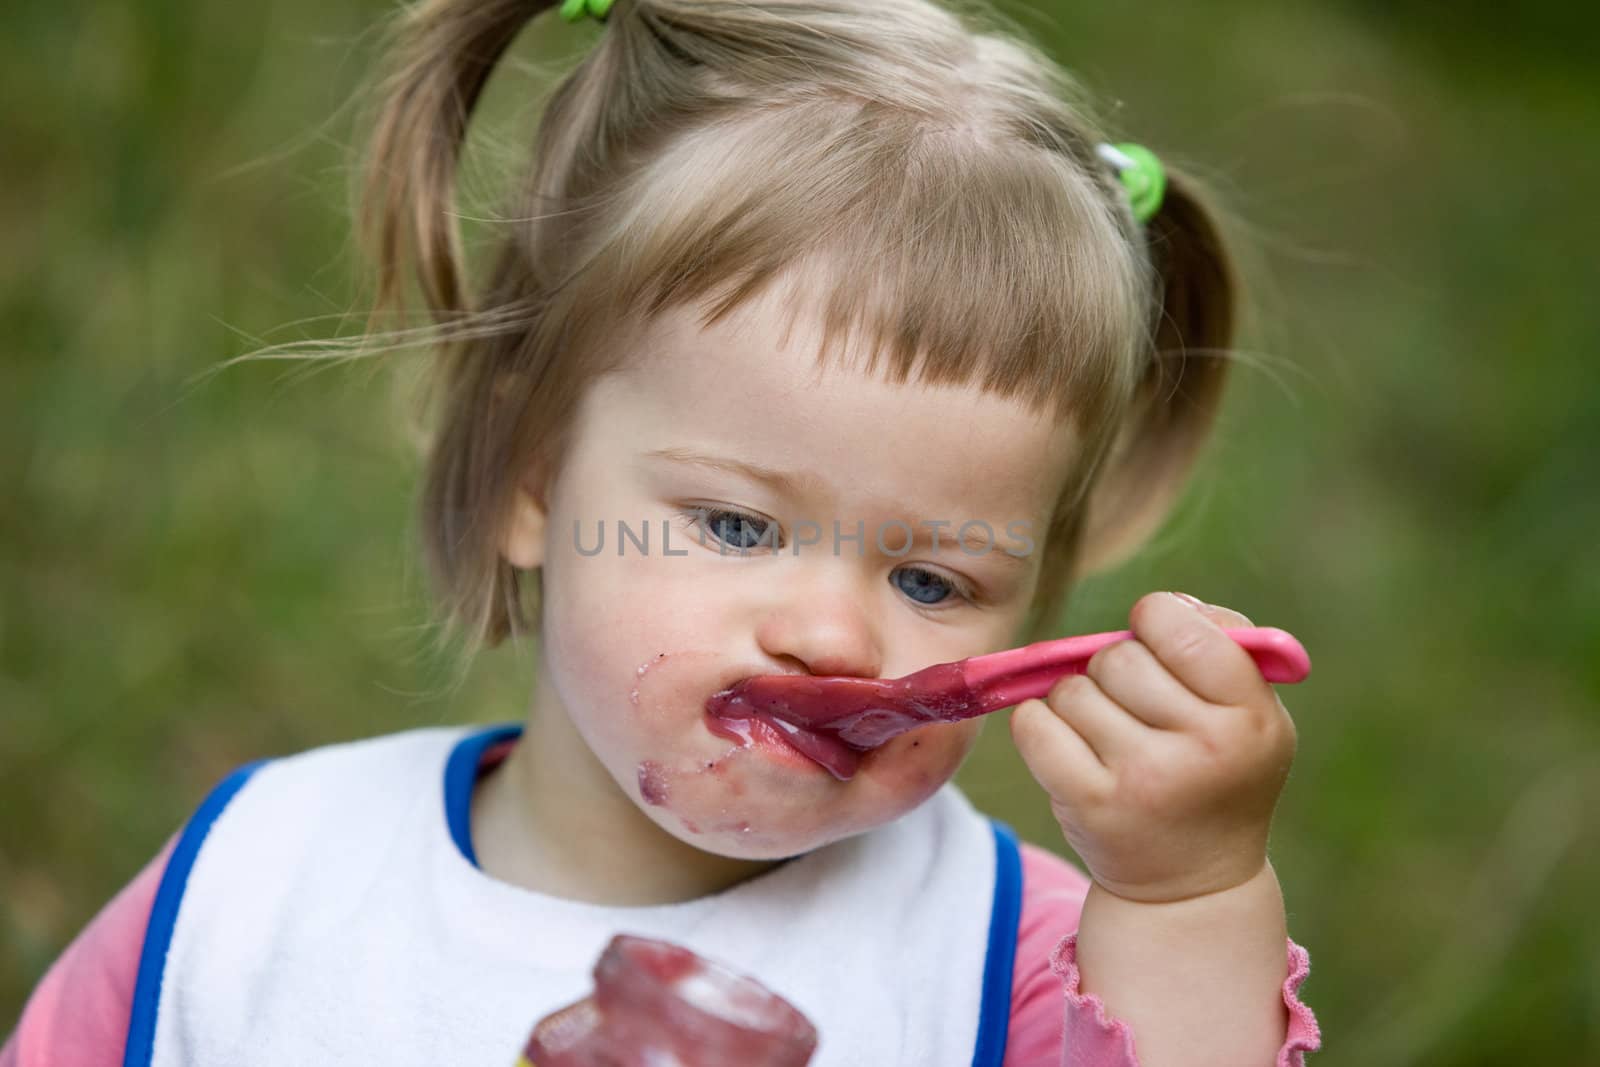 people series: little girl are eating fruit jam